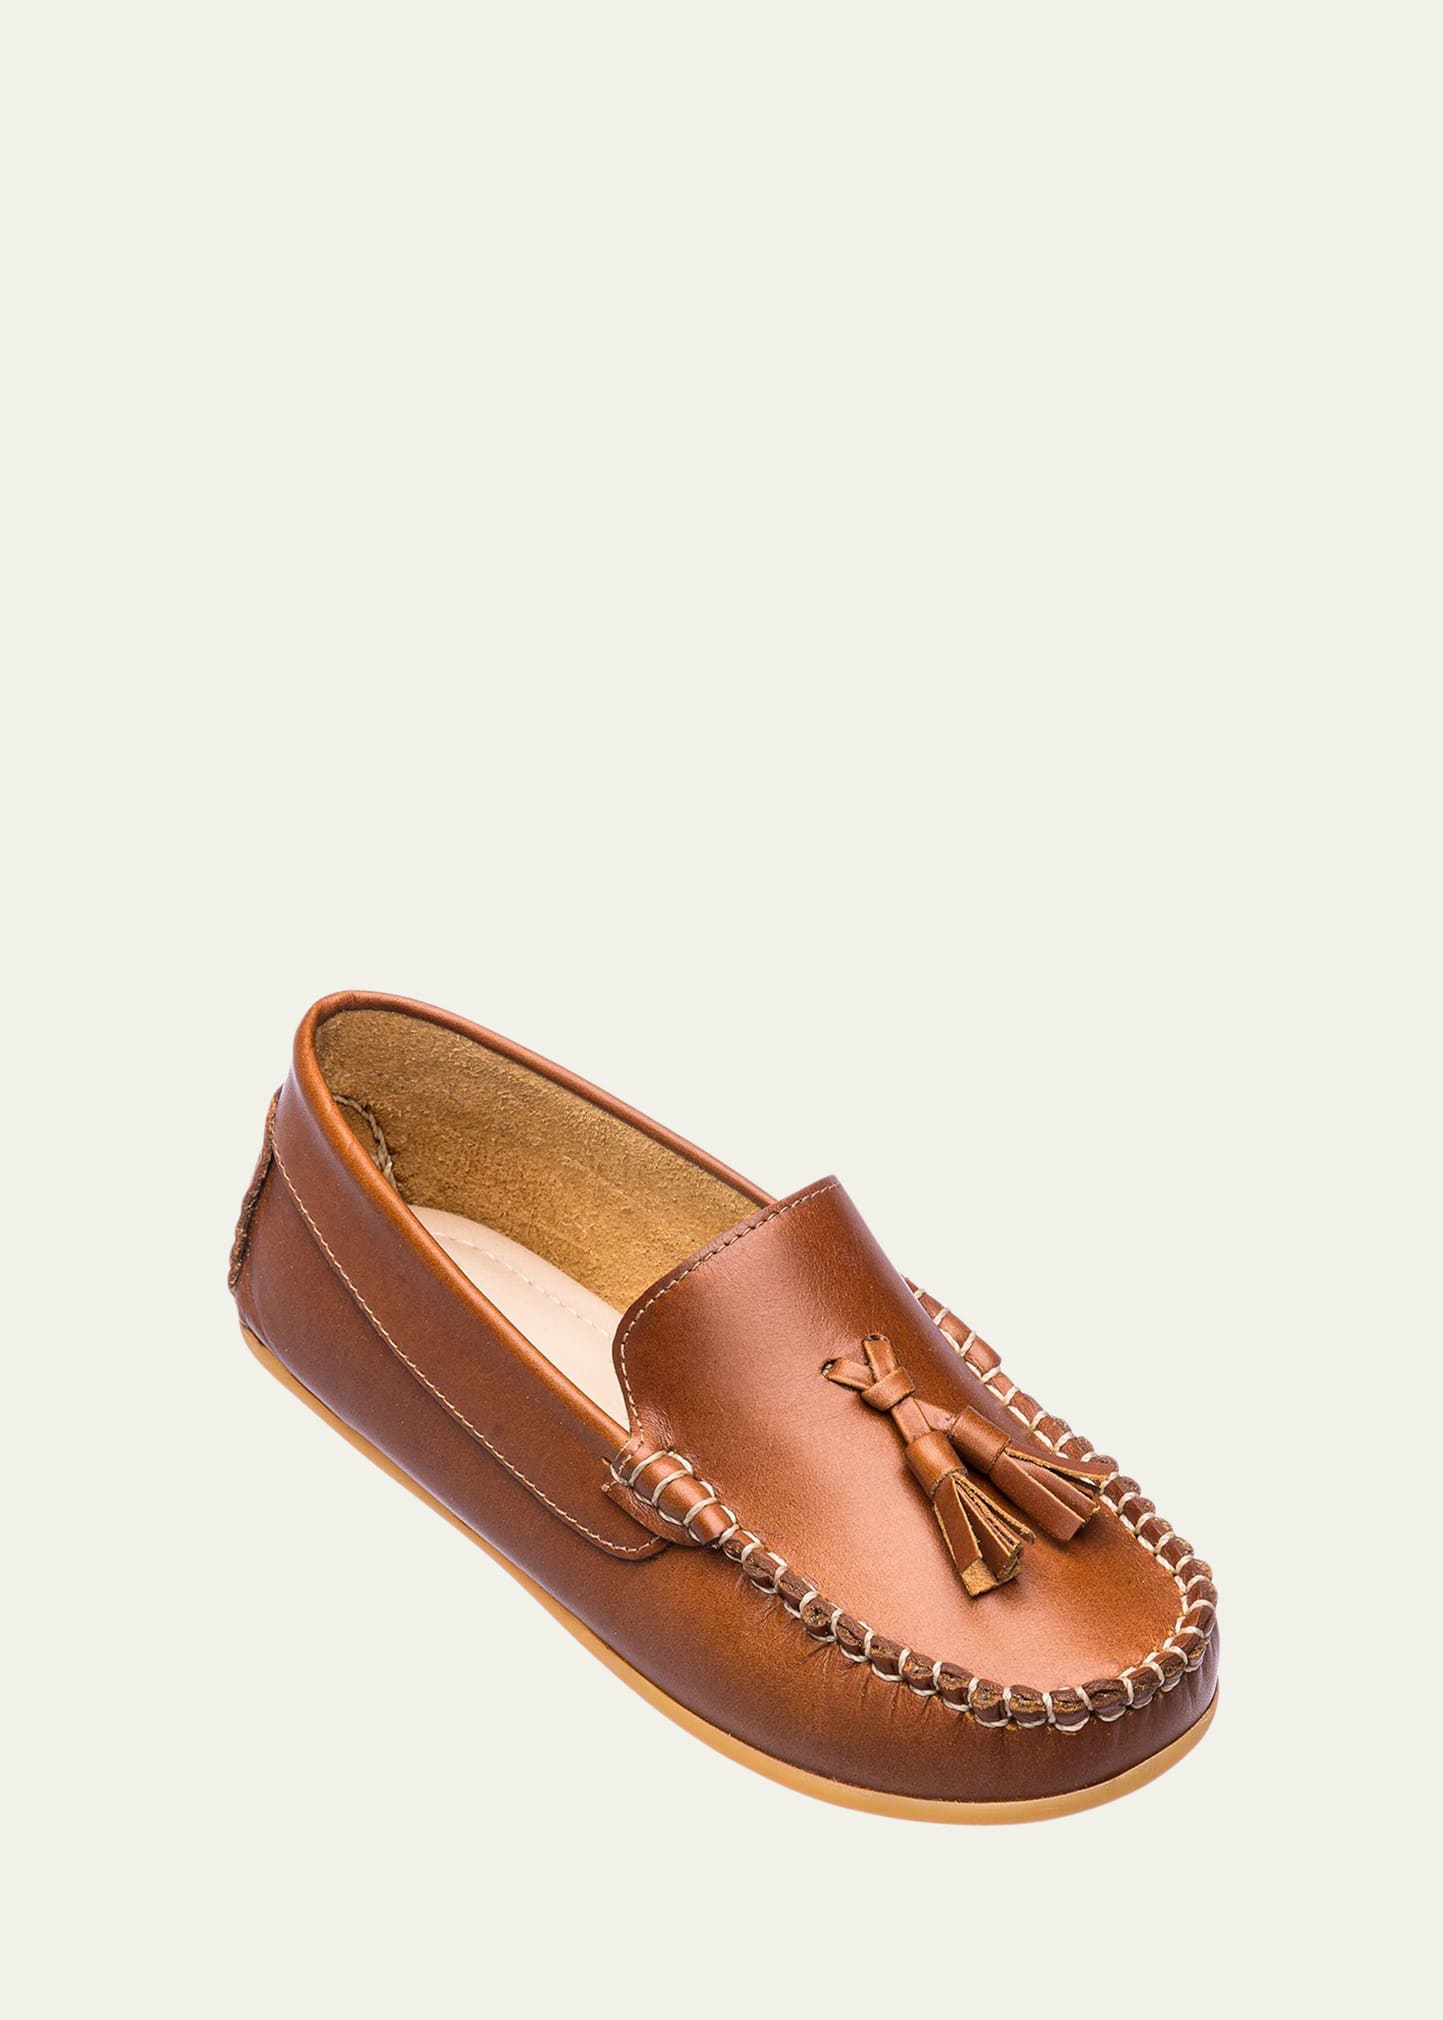 Elephantito Boy's Monaco Leather Loafers, Toddler/kids In Natural Tan